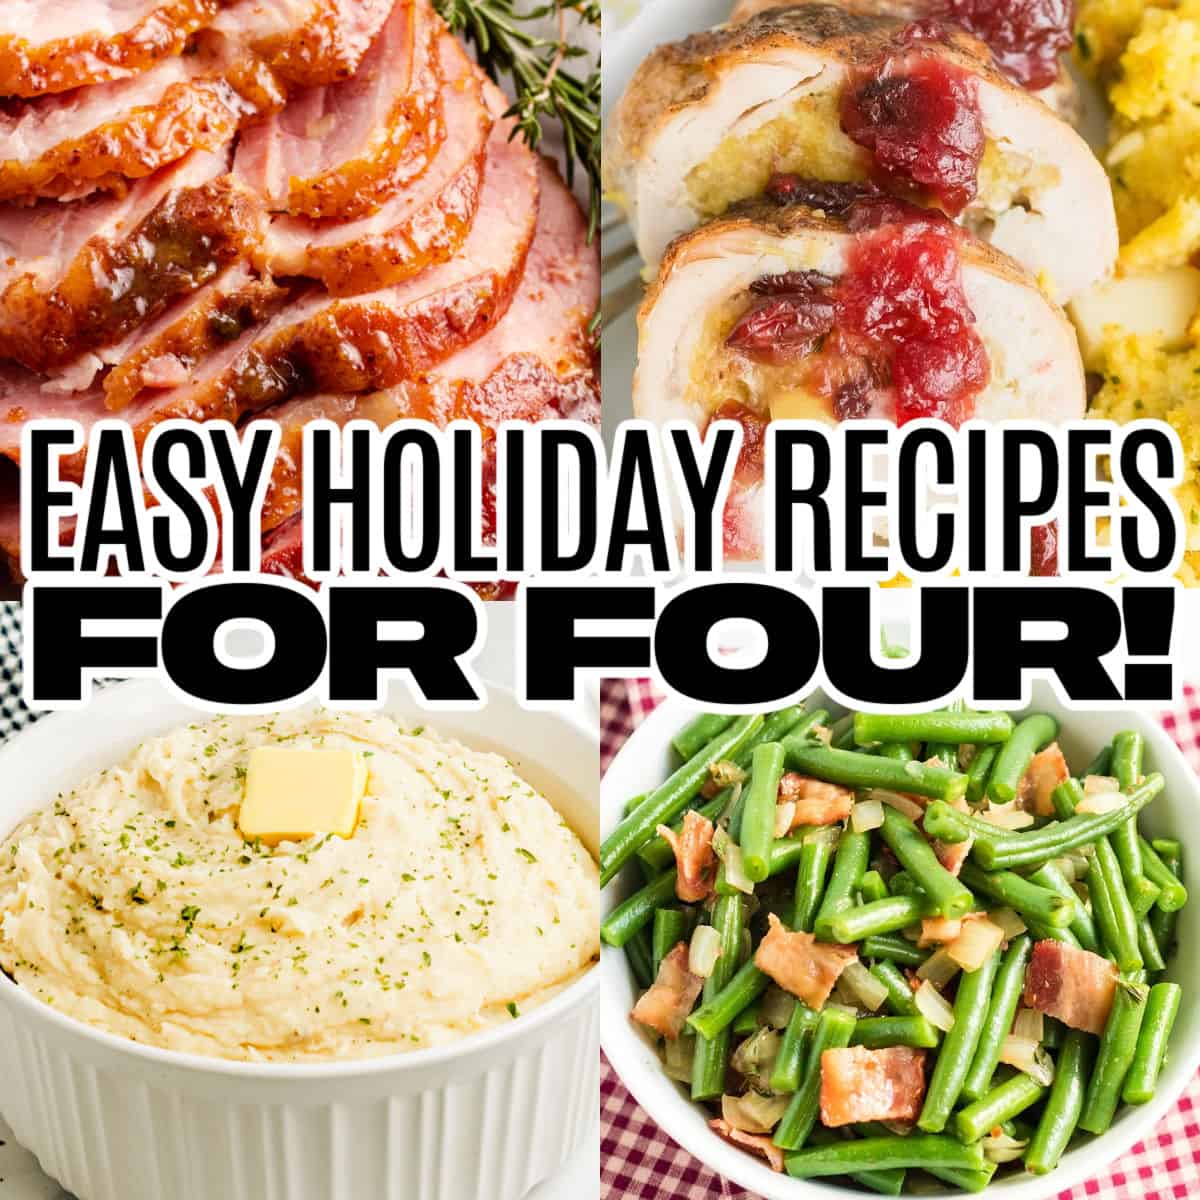 50 Quick and Easy Holiday Recipes & Ideas